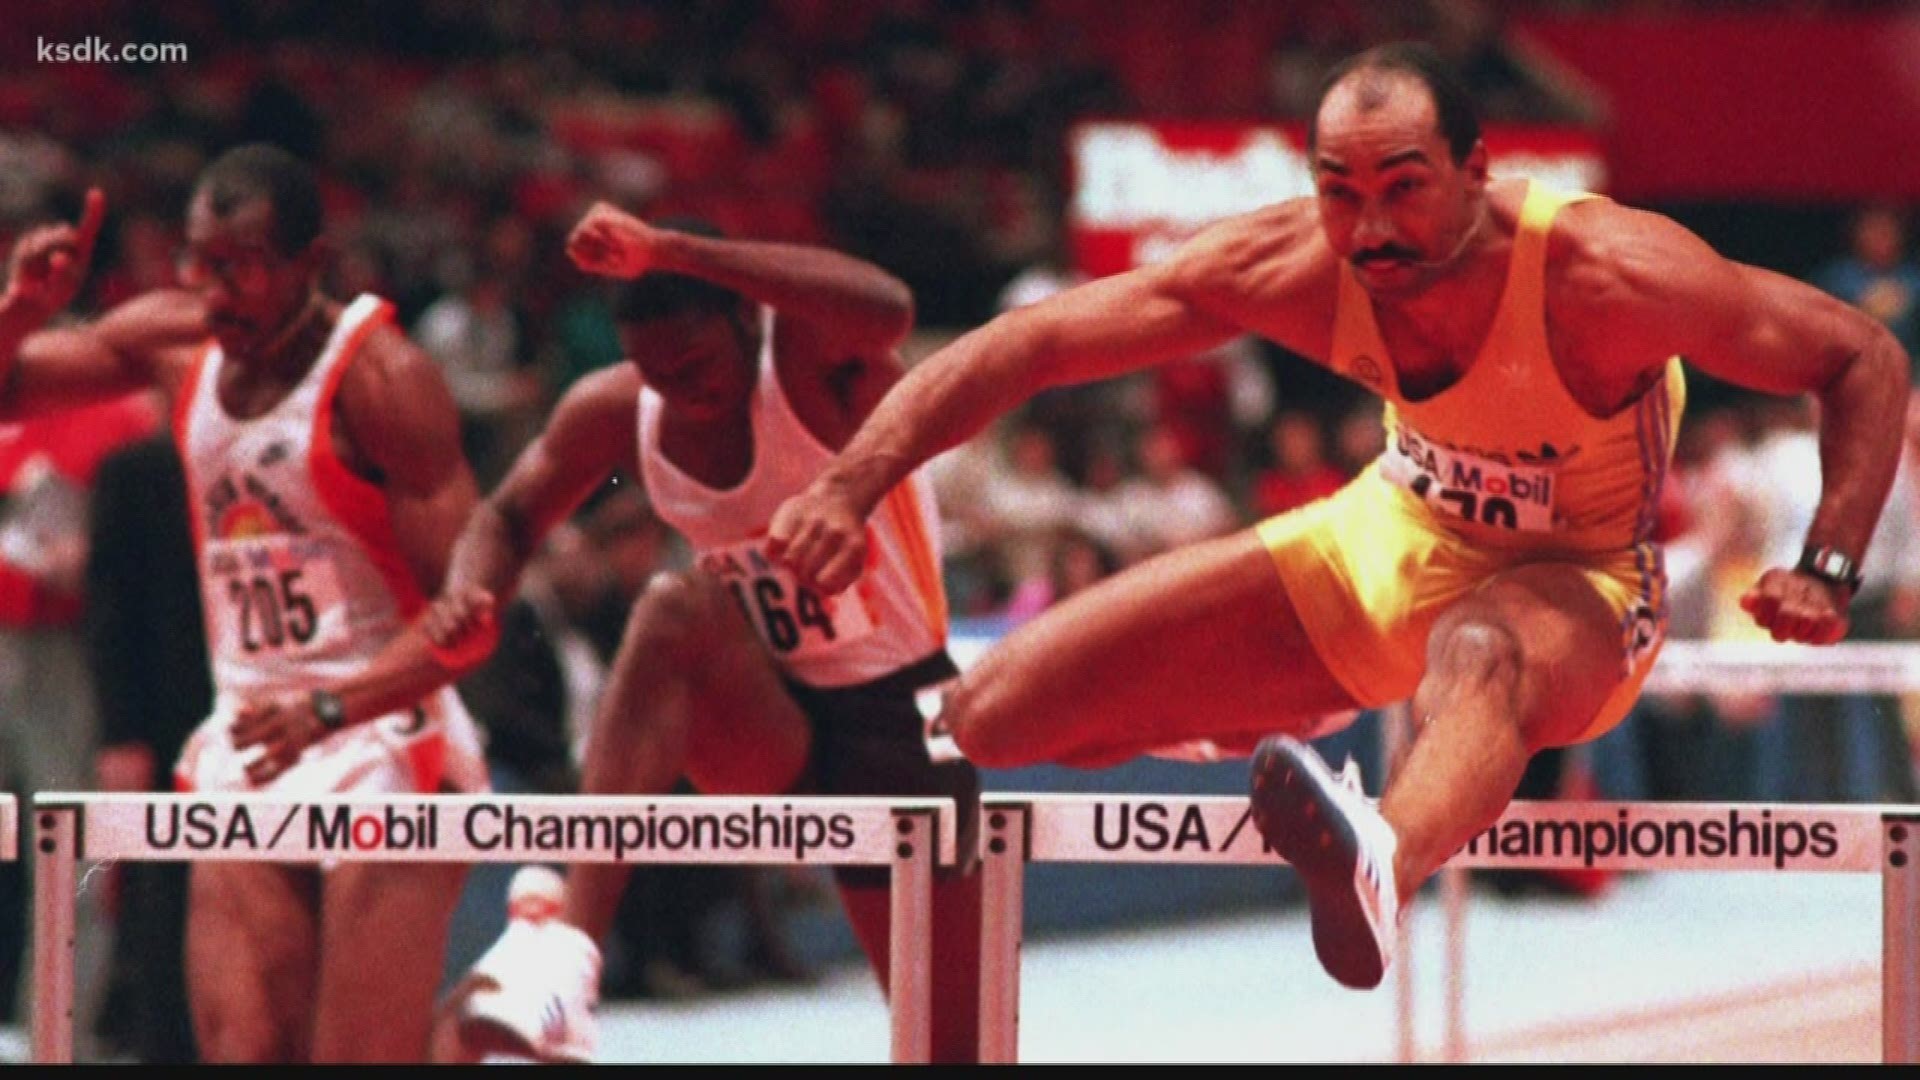 Foster is one of the greatest track athletes of all time. A new heart is giving him another chance at life.